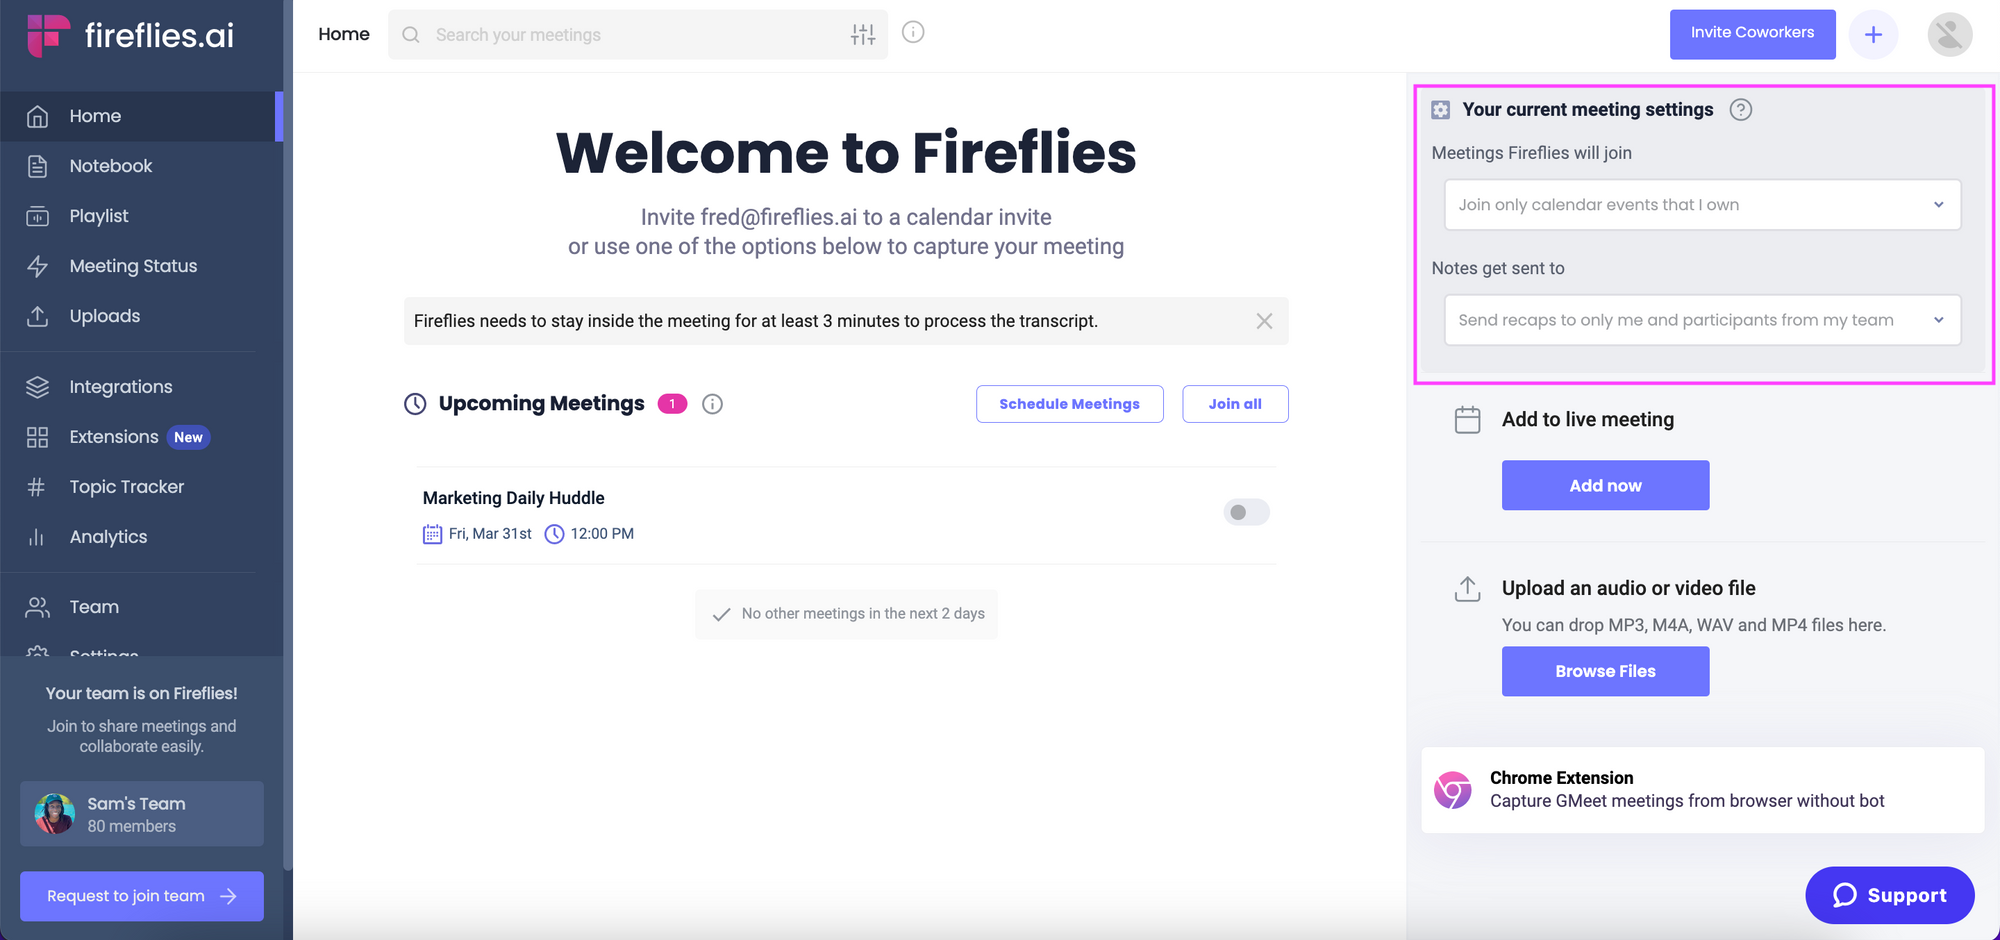 How to use ChatGPT for meetings - Fireflies Auto-join and recap settings